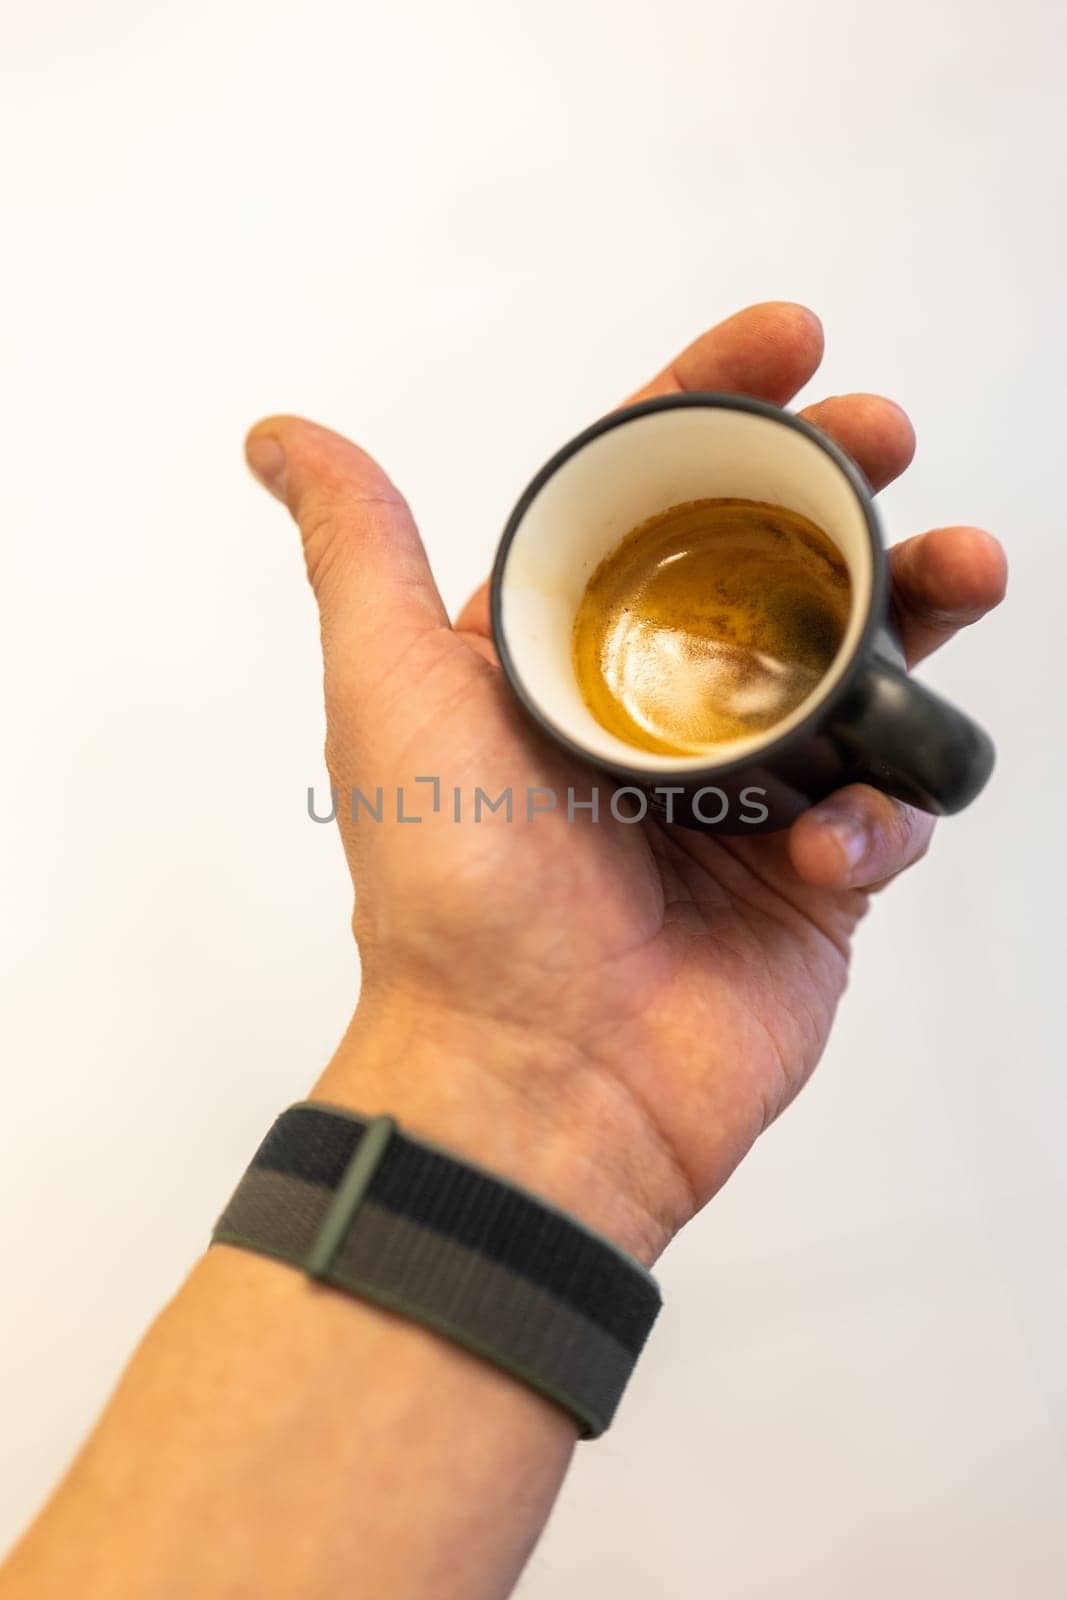 Close-up view of a freshly made espresso held in a person's hand.